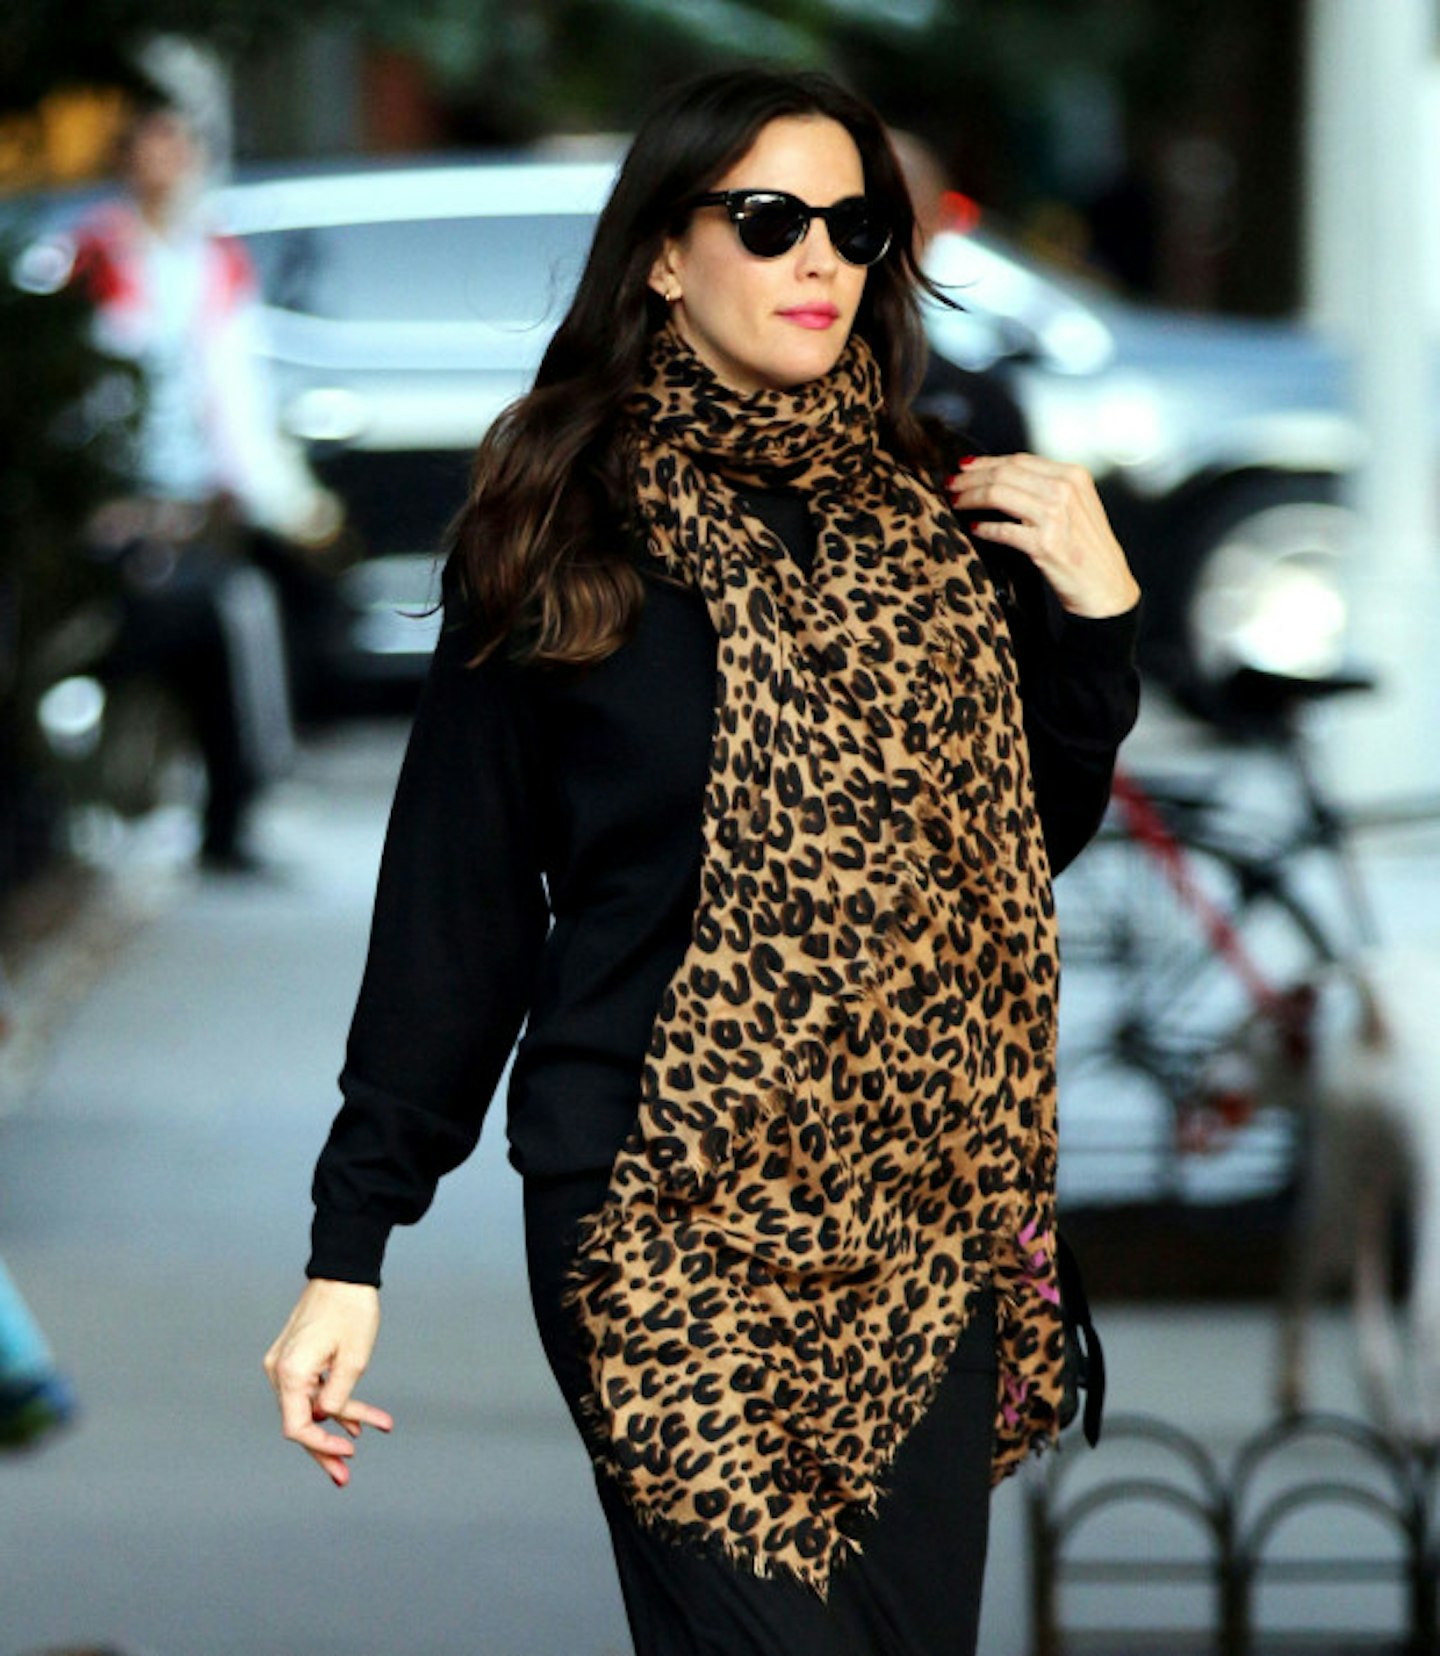 A leopard print scarf? Really? There's no fooling us Liv